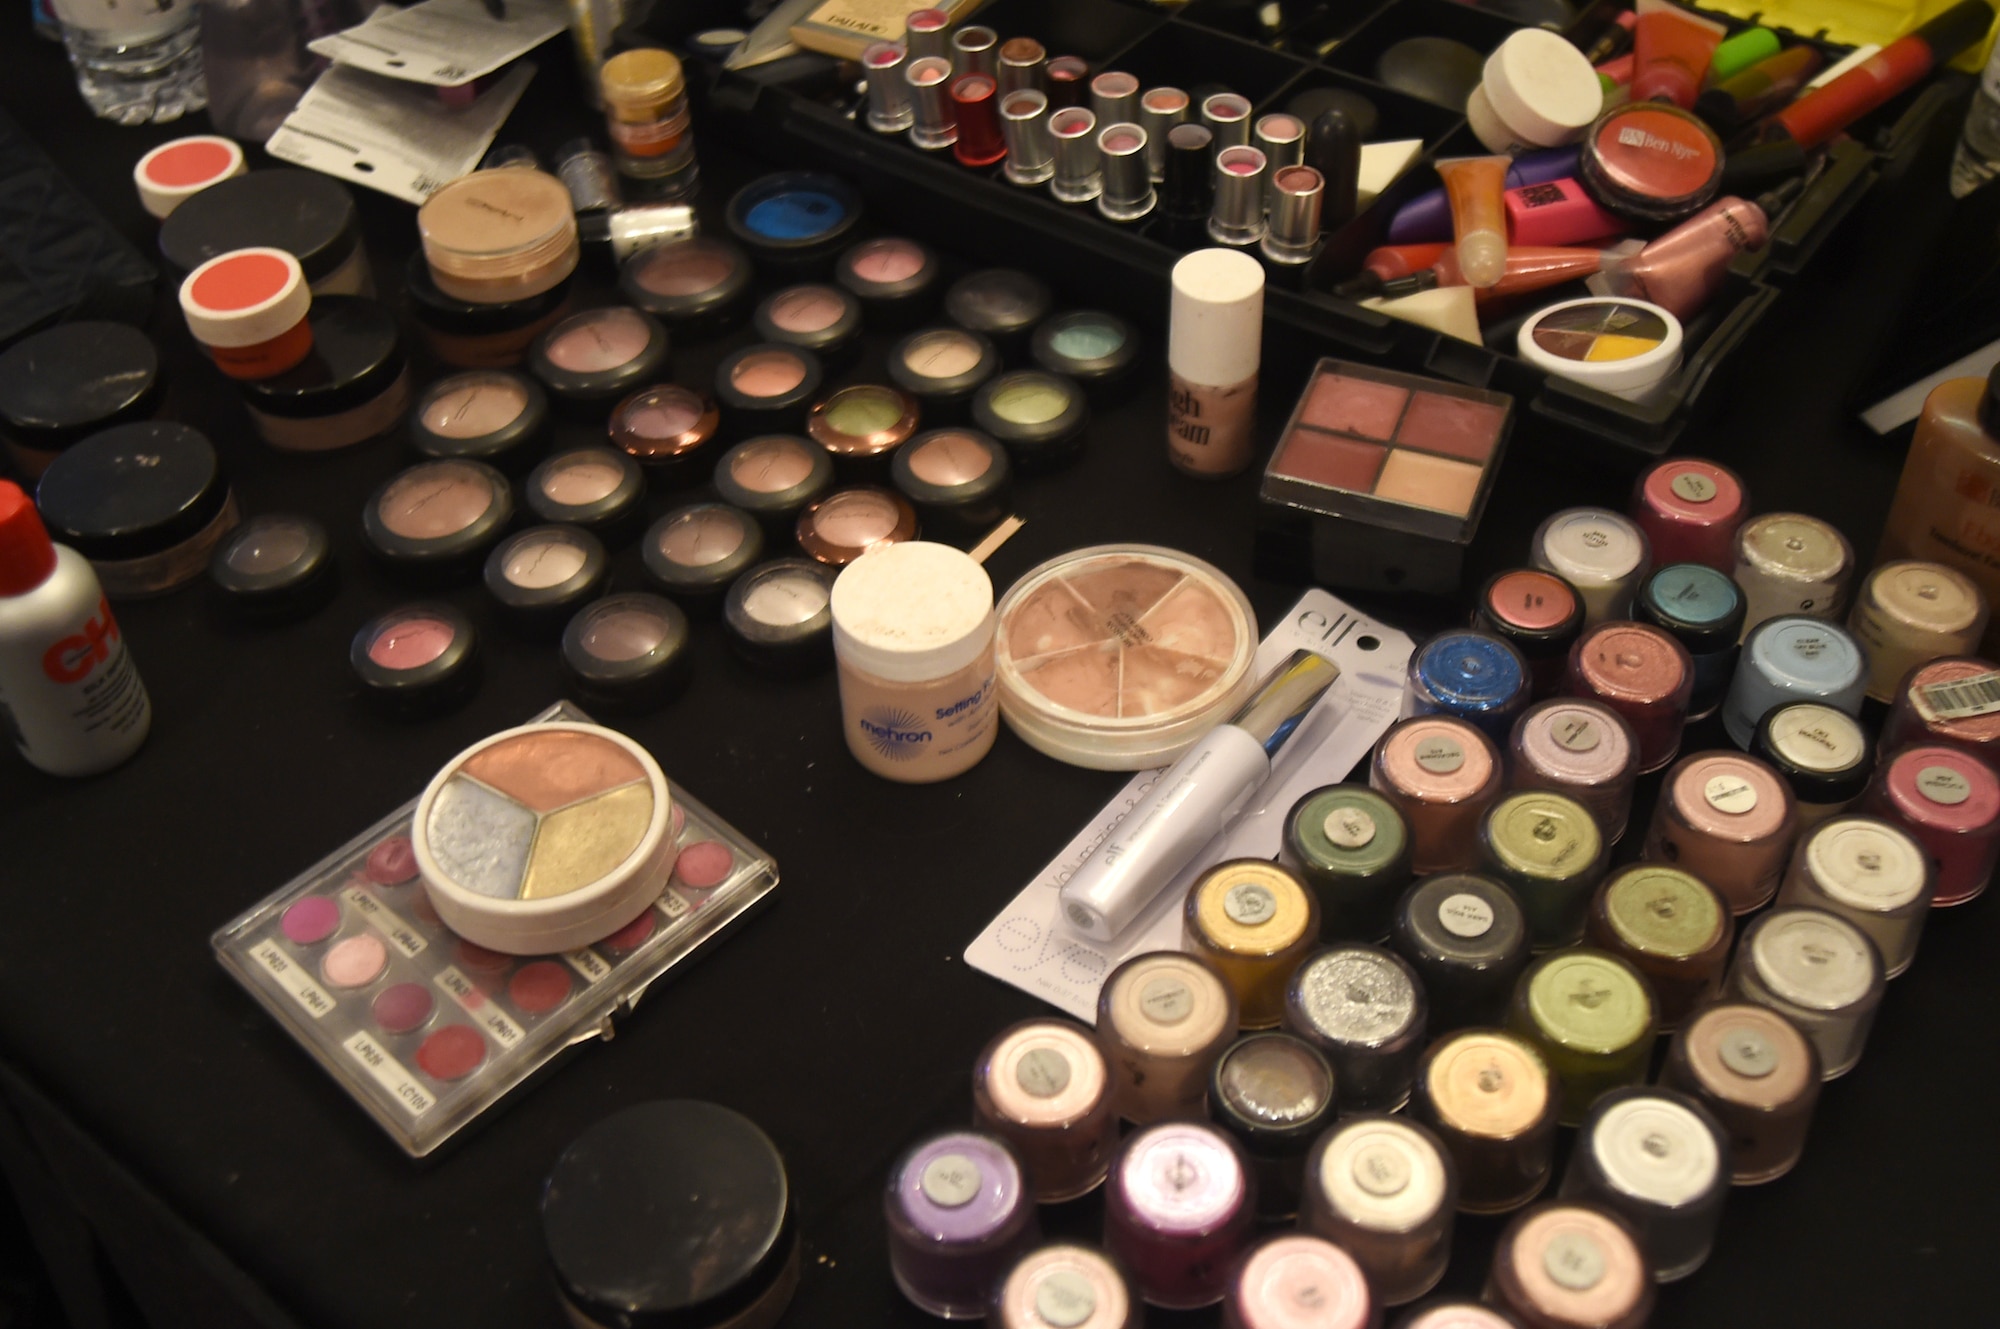 Makeup tables stand ready for attendees of the USO sponsored Operation That’s My Dress event in Las Vegas, Aug. 30, 2015. More than 800 active duty females, spouses, and teenage daughters received beauty products, complimentary hair and makeup sessions and a free dress during the two-day event. (U.S. Air Force photo by Tech. Sgt. Nadine Barclay)